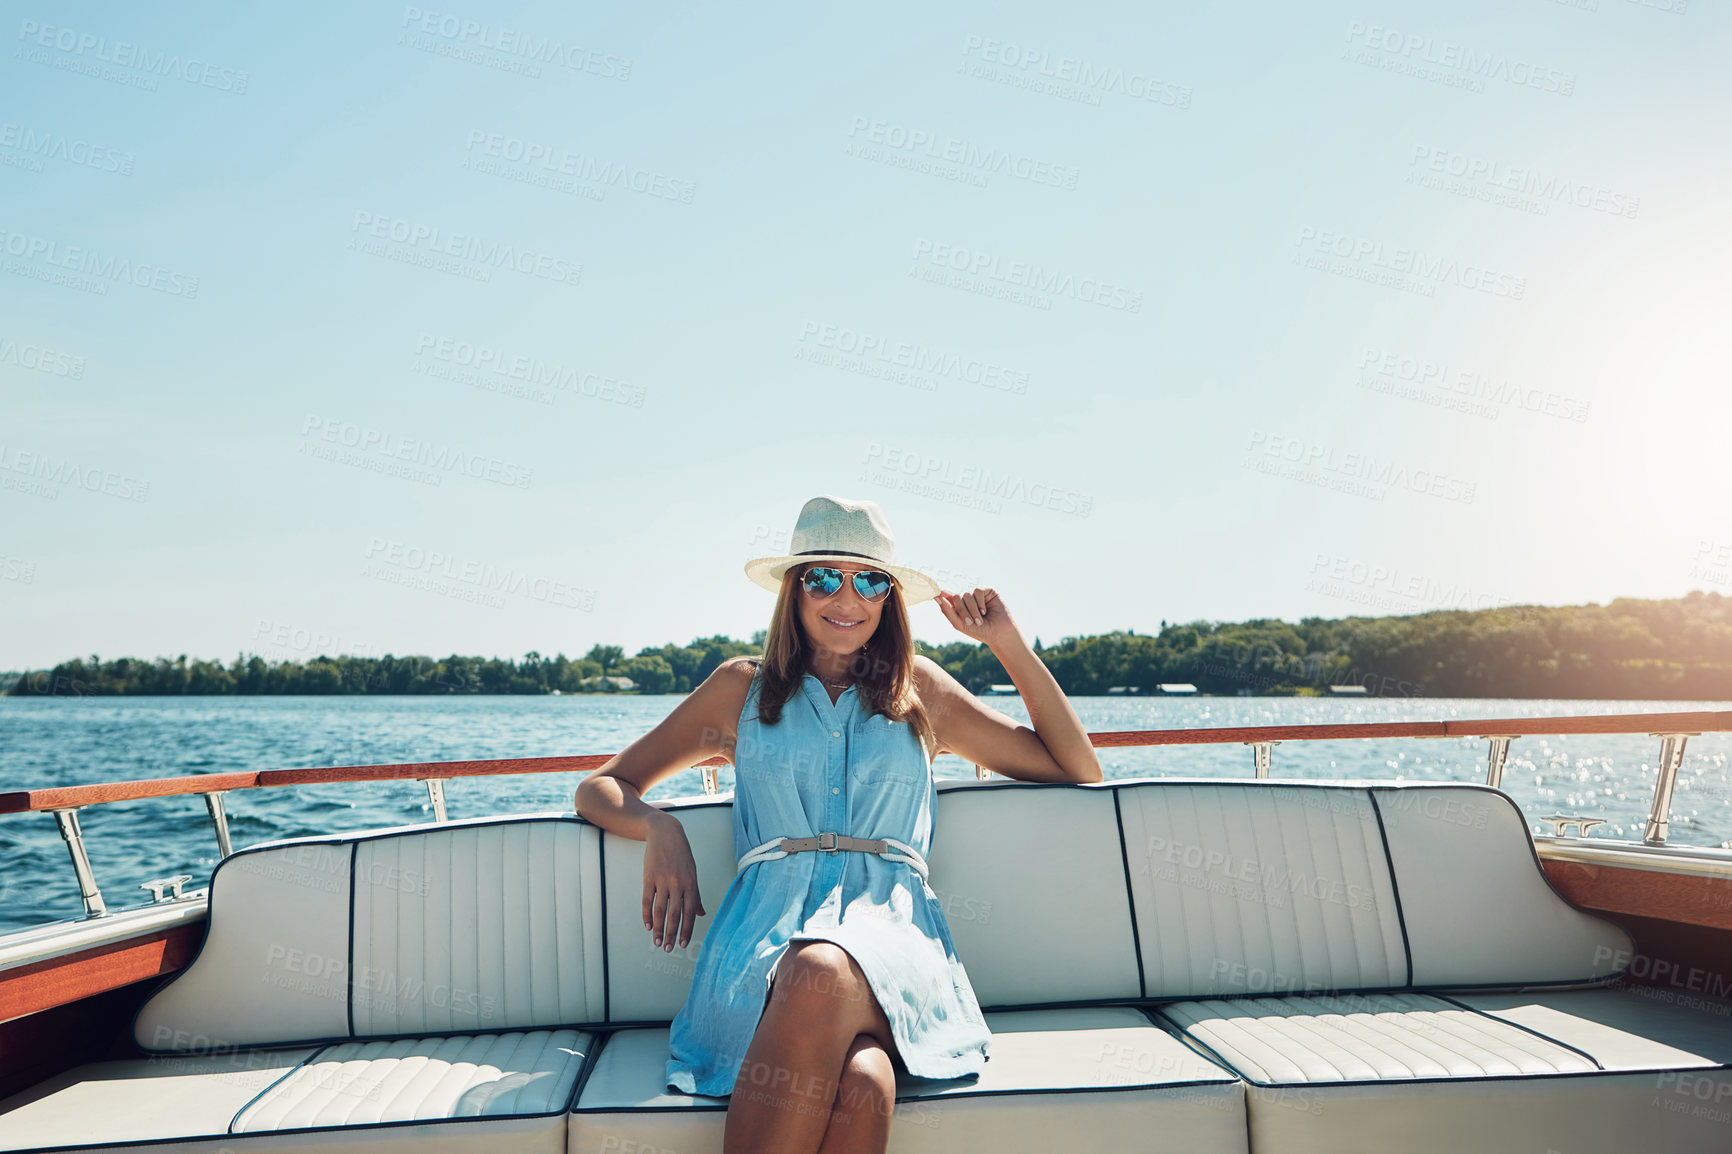 Buy stock photo Portrait of an attractive young woman spending the day on her private yacht